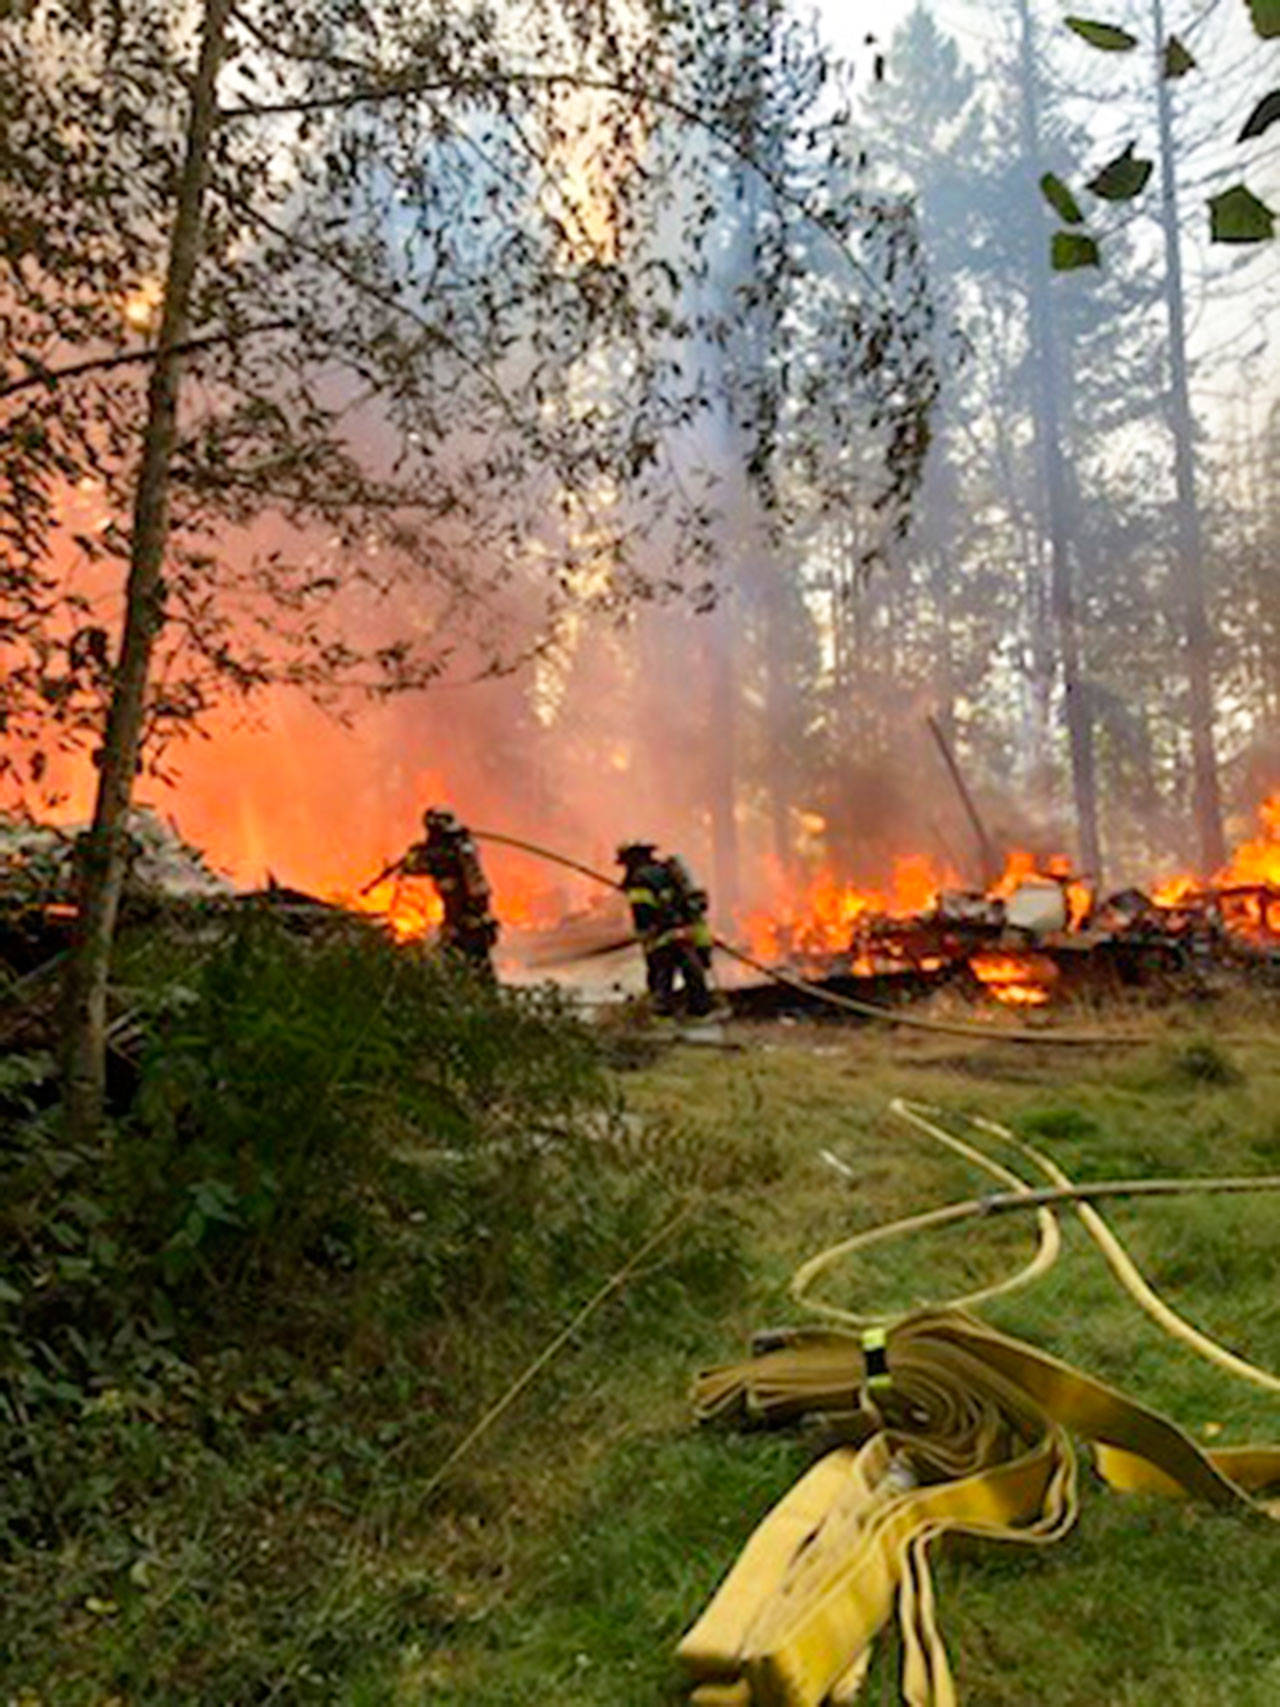 A Maple Valley brush fire Wednesday evening, Aug. 5, burned three abandoned structures and threatened residential homes. COURTESY PHOTO, Puget Sound Fire                                A Maple Valley brush fire Wednesday evening, Aug. 5, burned three abandoned structures and threatened residential homes. COURTESY PHOTO, Puget Sound Fire